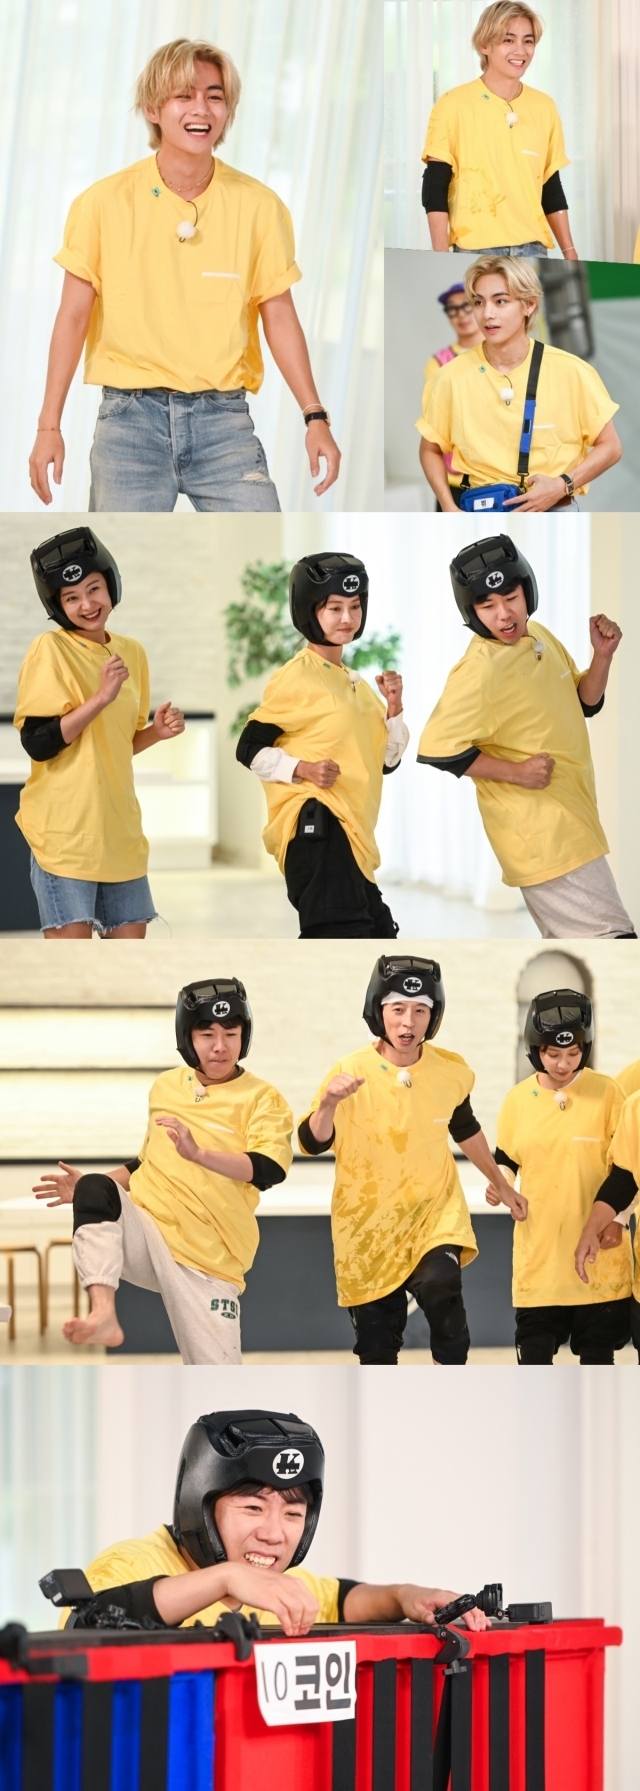 Group BTS V is on SBS Running Man.In a recent recording, Vu, along with members, conducted a soapy water mission for the essential course of entertainment.I had to get COIN through the obstacles at the bottom of the soapy water, but Vu, who first stepped on the slippery floor, showed Laughter an unintentional hug.Therefore, the members become a single body gag, and there is something that can not be done.When the full-scale mission began, veteran members showed a straight-forward instinct toward COIN. Kim Jong-kook showed a strong ace to overpower the surrounding people with powerful power, and Song Ji-hyo had a cicada operation that clings to members. I was looking for COIN acquisition.In addition, Yoo Jae-Suk tried to go through the obstacles with speed and sleek body, but it was a mess because of a questionable accident. On the other hand, V was nervous that he would avoid his brother from the beginning.After the adaptation, he was reborn as a human curling throwing body and shook the plate with a new game between the veterans of the performing arts.In addition, a dance was held on the soapy water, and Yoo Jae-Suk reenacted the dance of the girl group and raised the tension.BTSs  ⁇  Dance Line  ⁇   ⁇   ⁇   ⁇   ⁇   ⁇ .........................................................Vu showed the aspect of the  ⁇   ⁇   ⁇   ⁇   ⁇   ⁇ , but his work, which is full of Laughter with the  ⁇   ⁇   ⁇   ⁇   ⁇   ⁇ , is going to be online on the afternoon of the 9th Running Man YouTube channel.This weeks Running Man will be broadcasted at 6:10 pm on Sunday, October 10, five minutes earlier than usual, with a special enlargement.